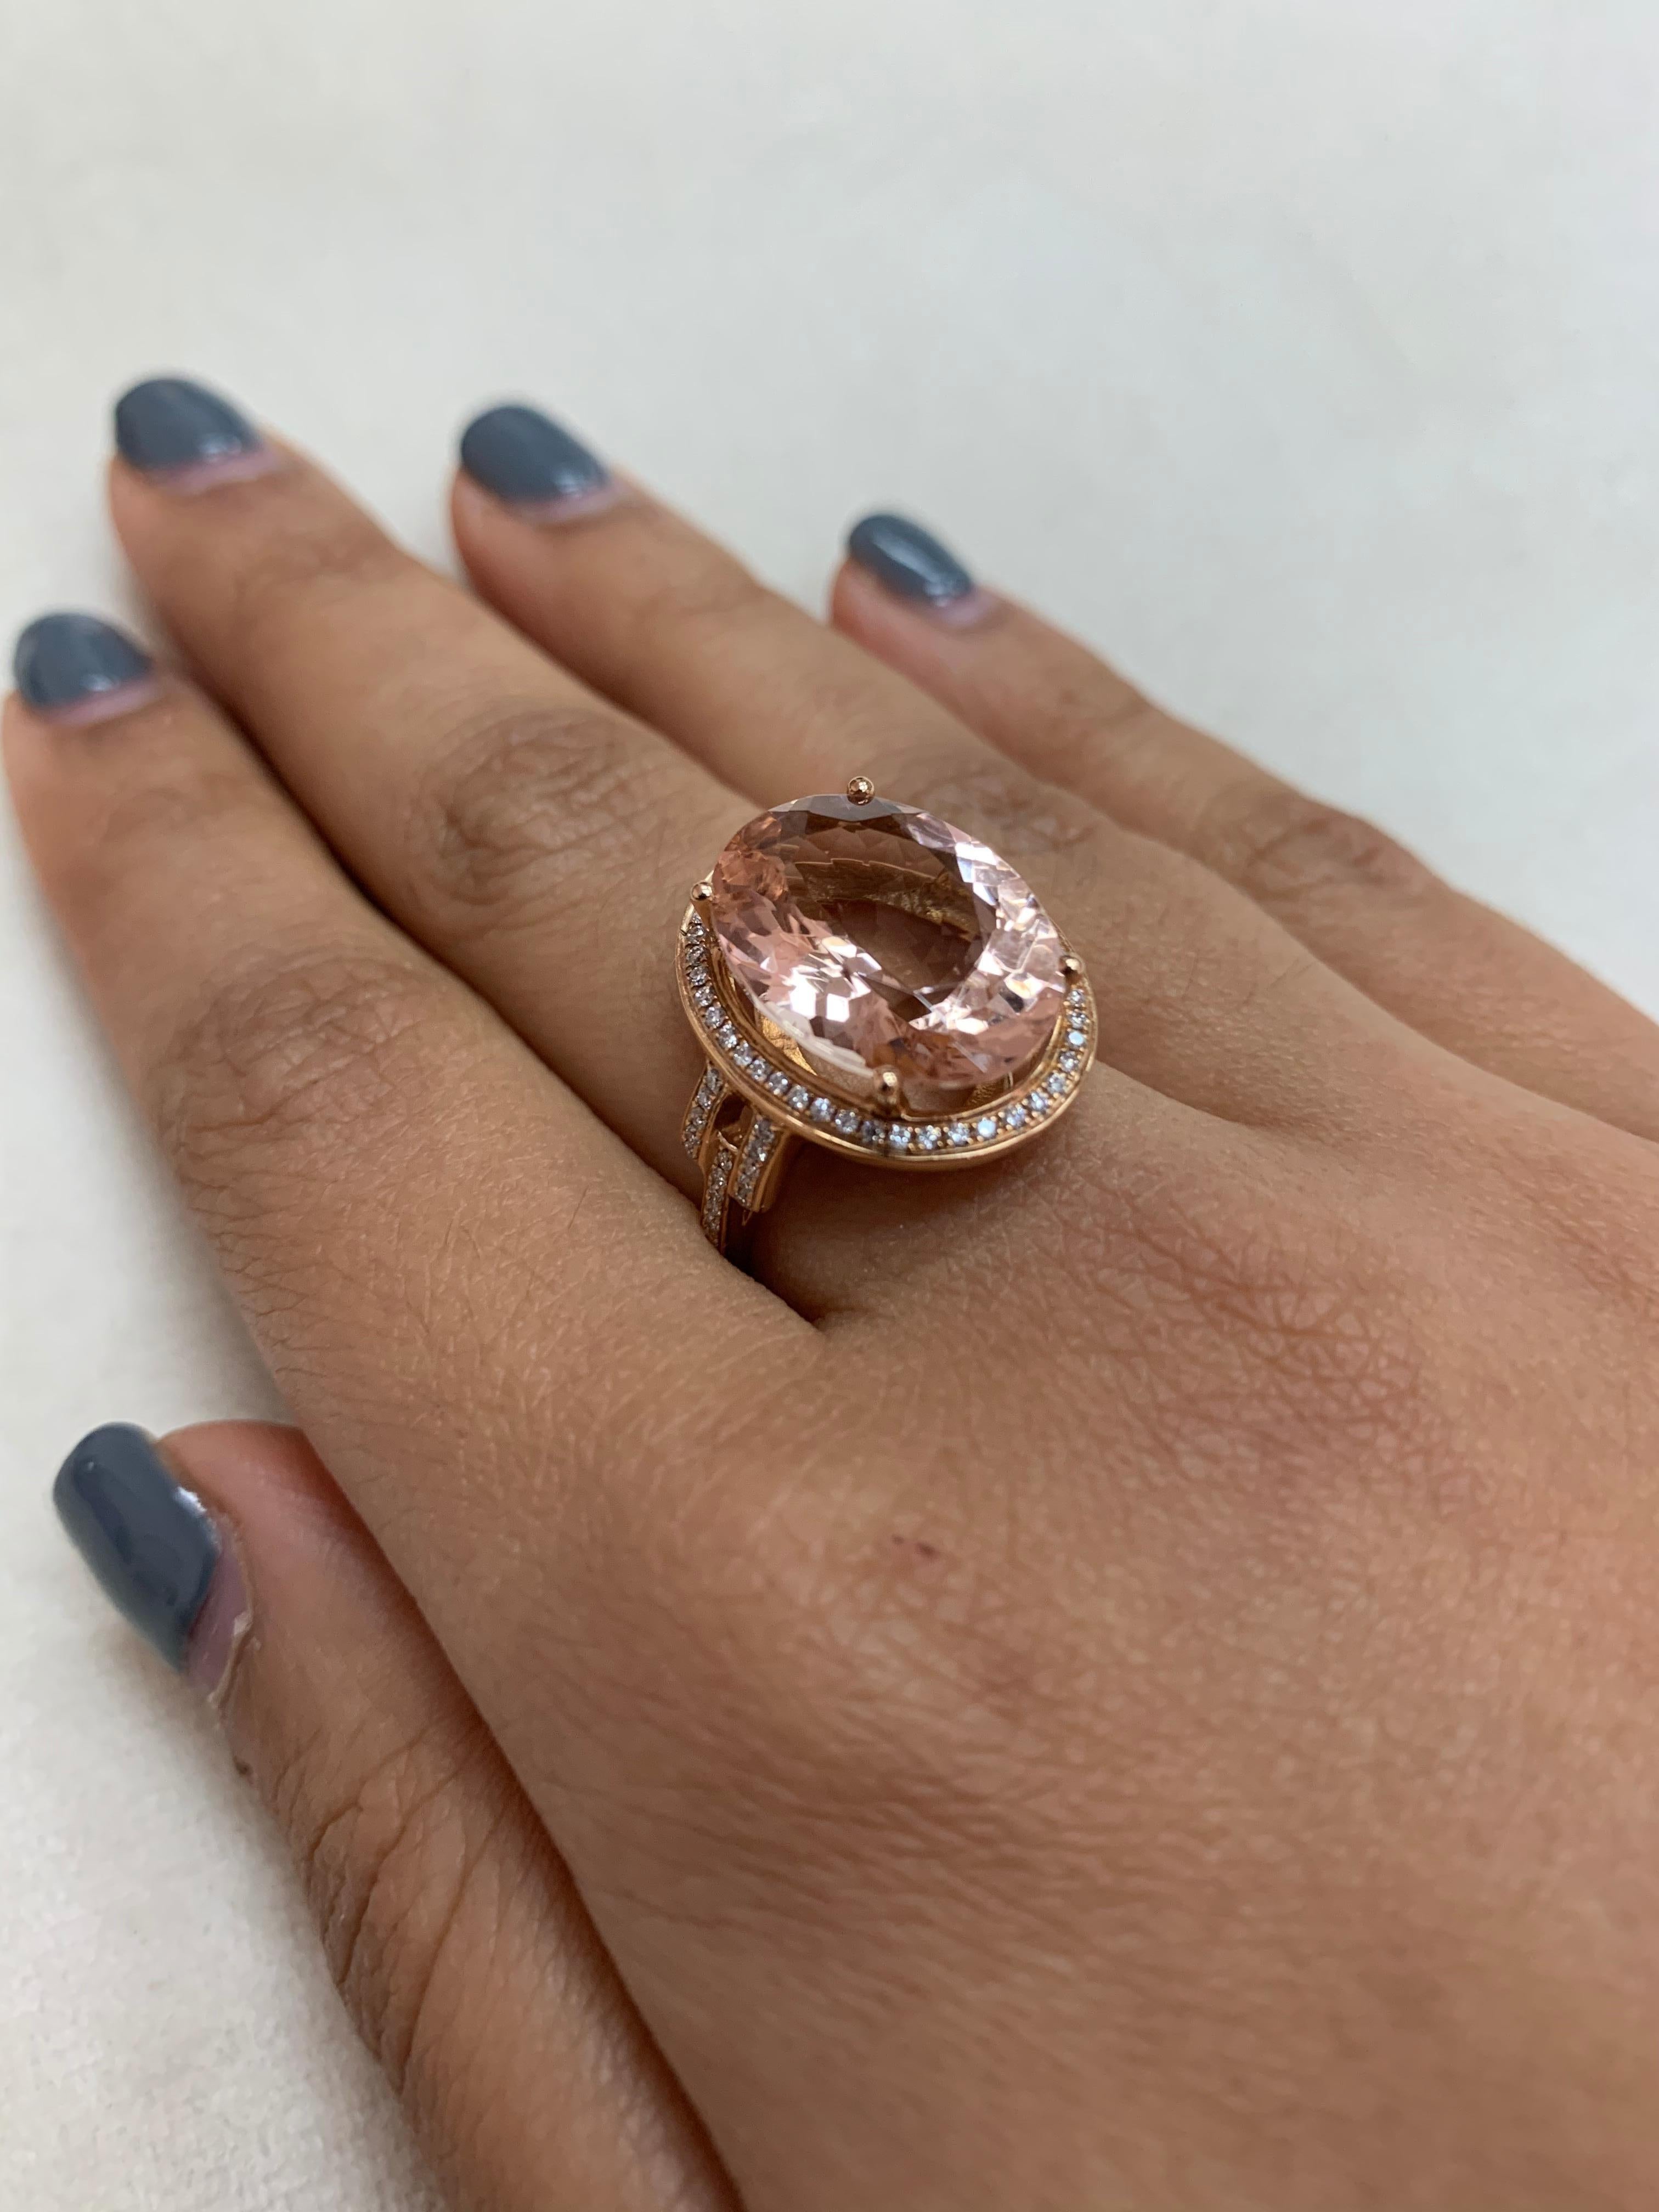 Oval Cut 7.8 Carat Morganite Ring in 18 Karat Rose Gold with Diamond For Sale